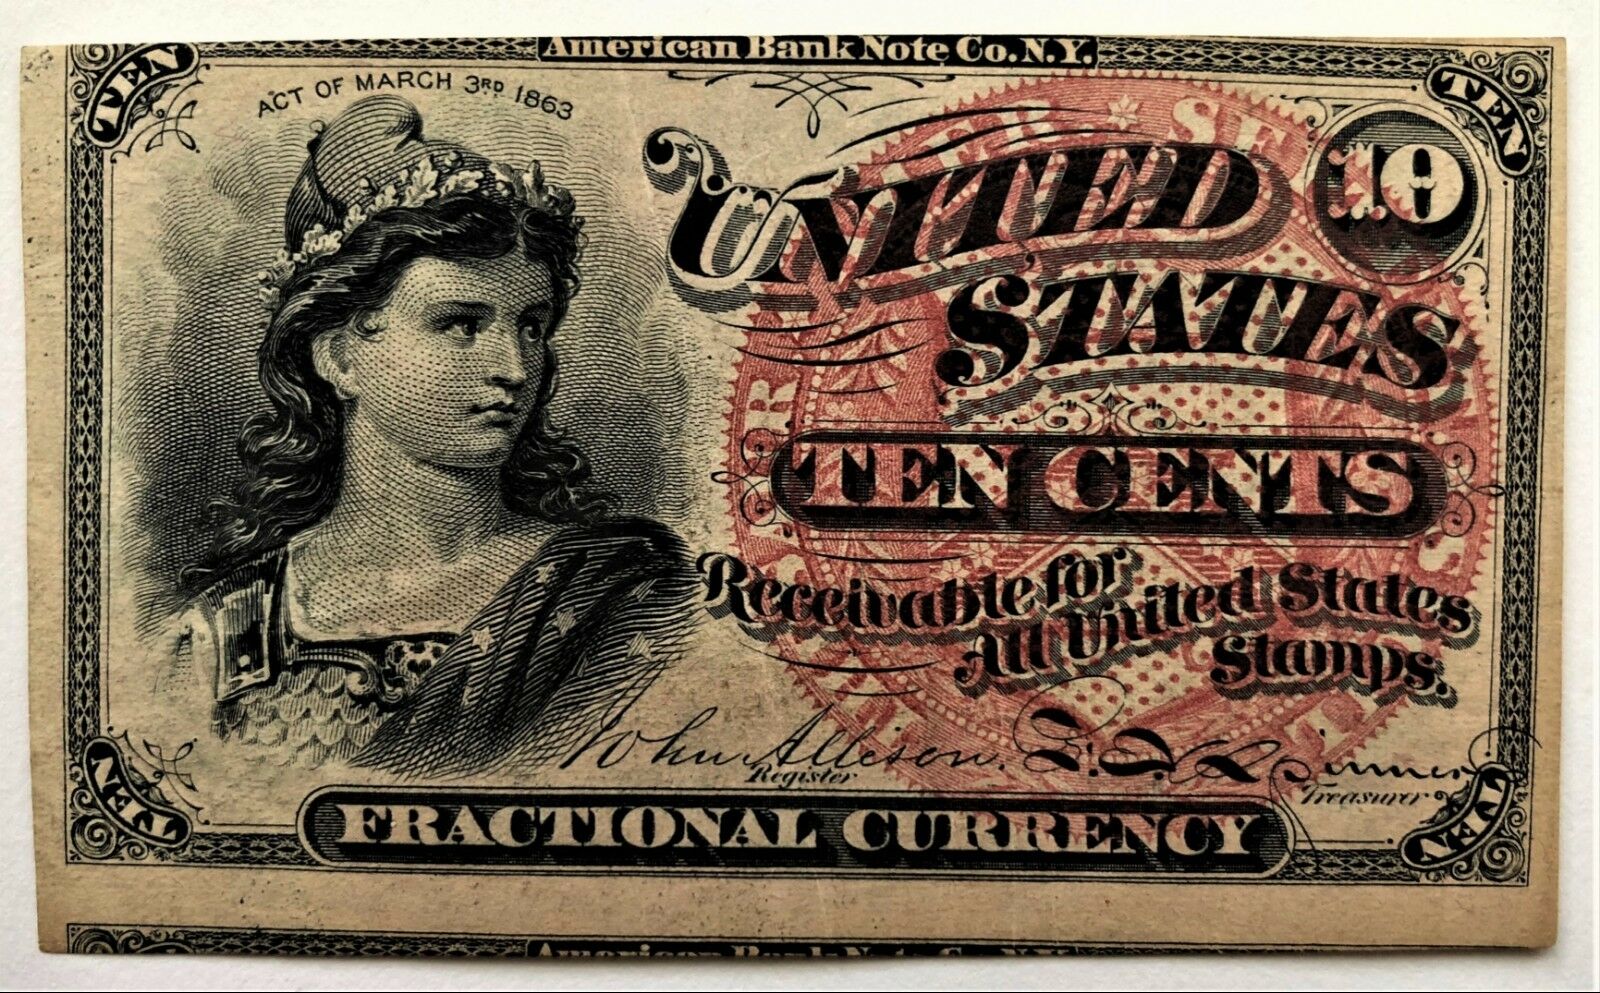 10¢ US FRACTIONAL of 1869 SPECTACULAR MIS - CUT FRONT ERROR NATIONAL BNC to ABNC